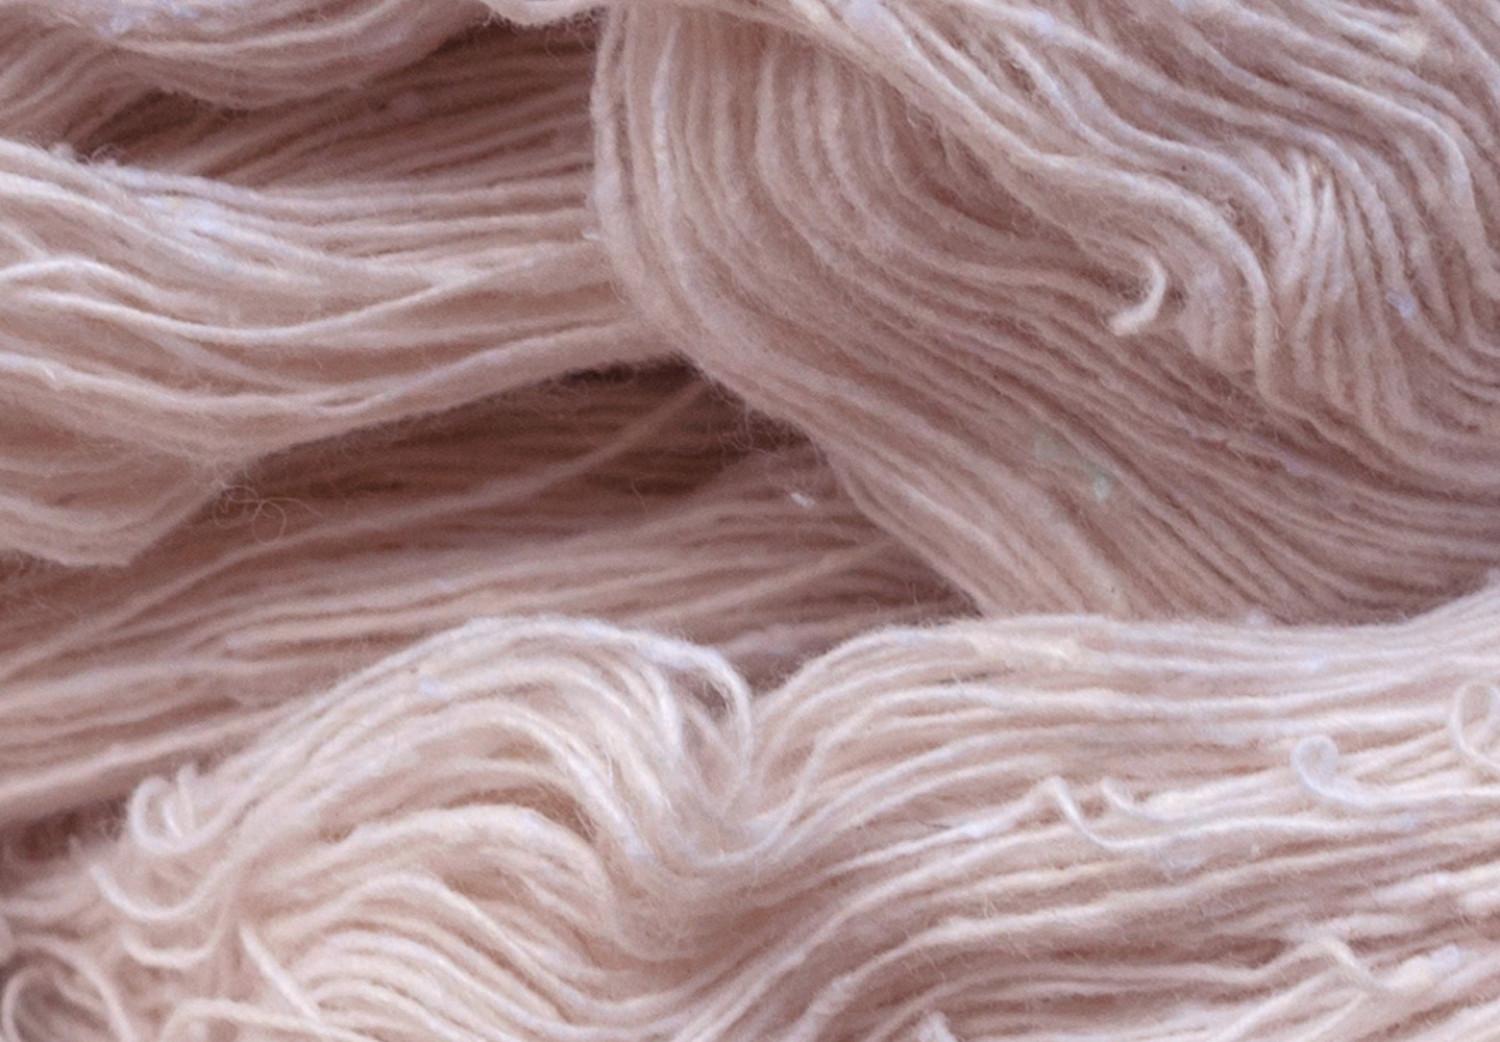 Poster Woolen Fantasy - pink fabric composition in the form of loose threads